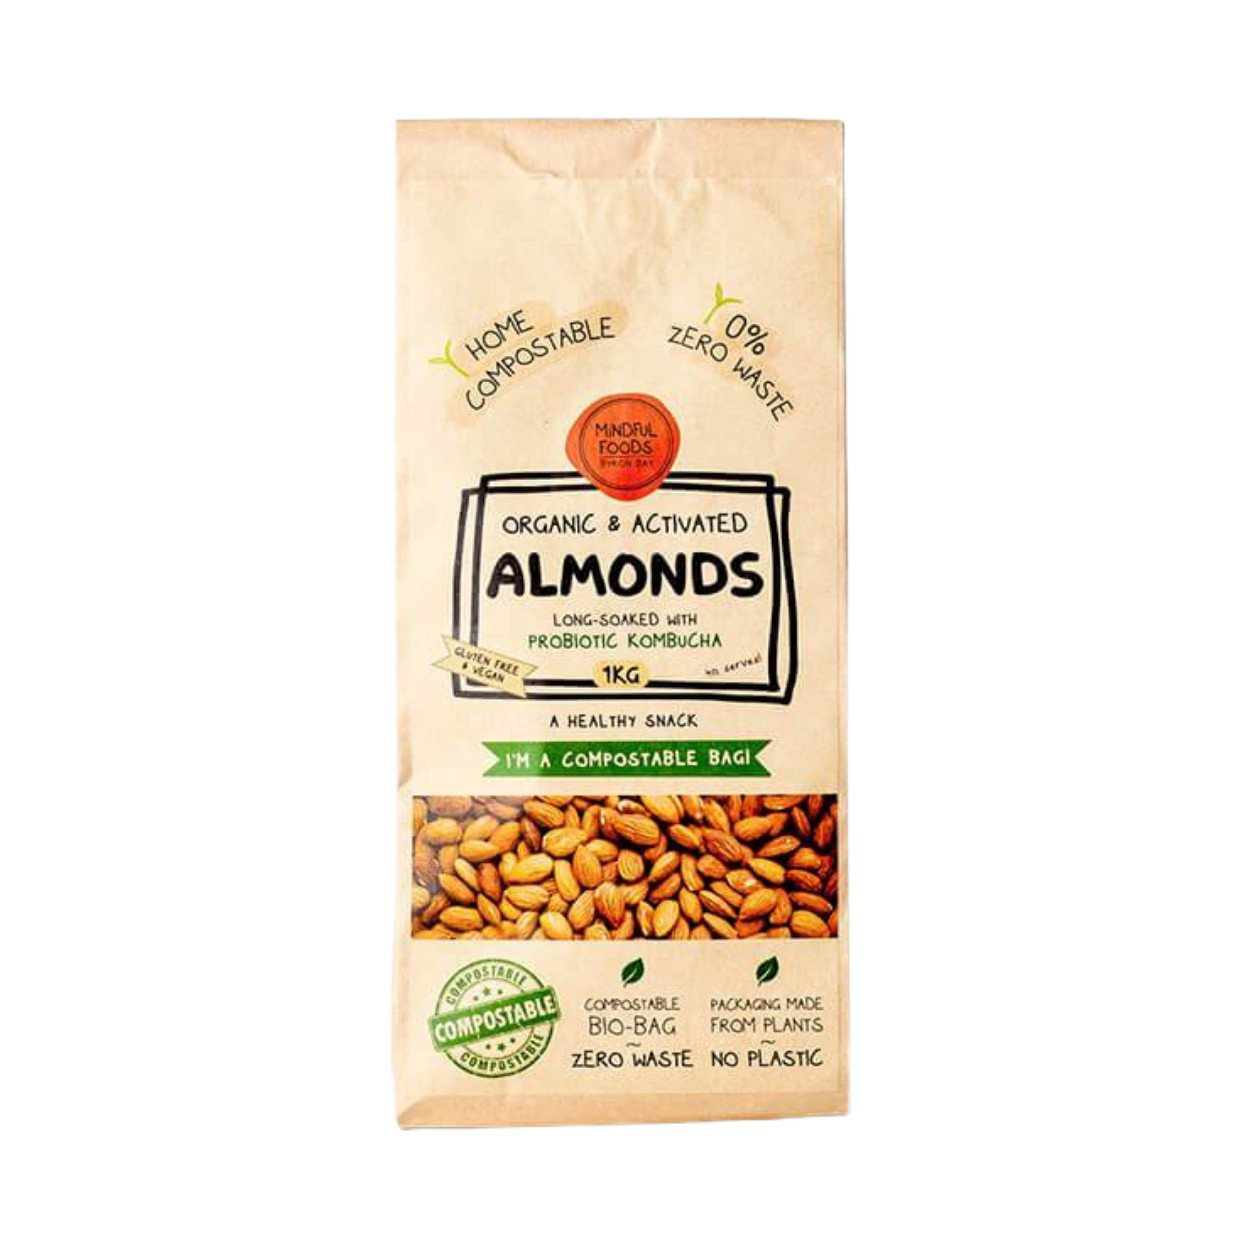 Mindful Foods Almonds 225g, 450g Or 1kg (Organic & Activated)